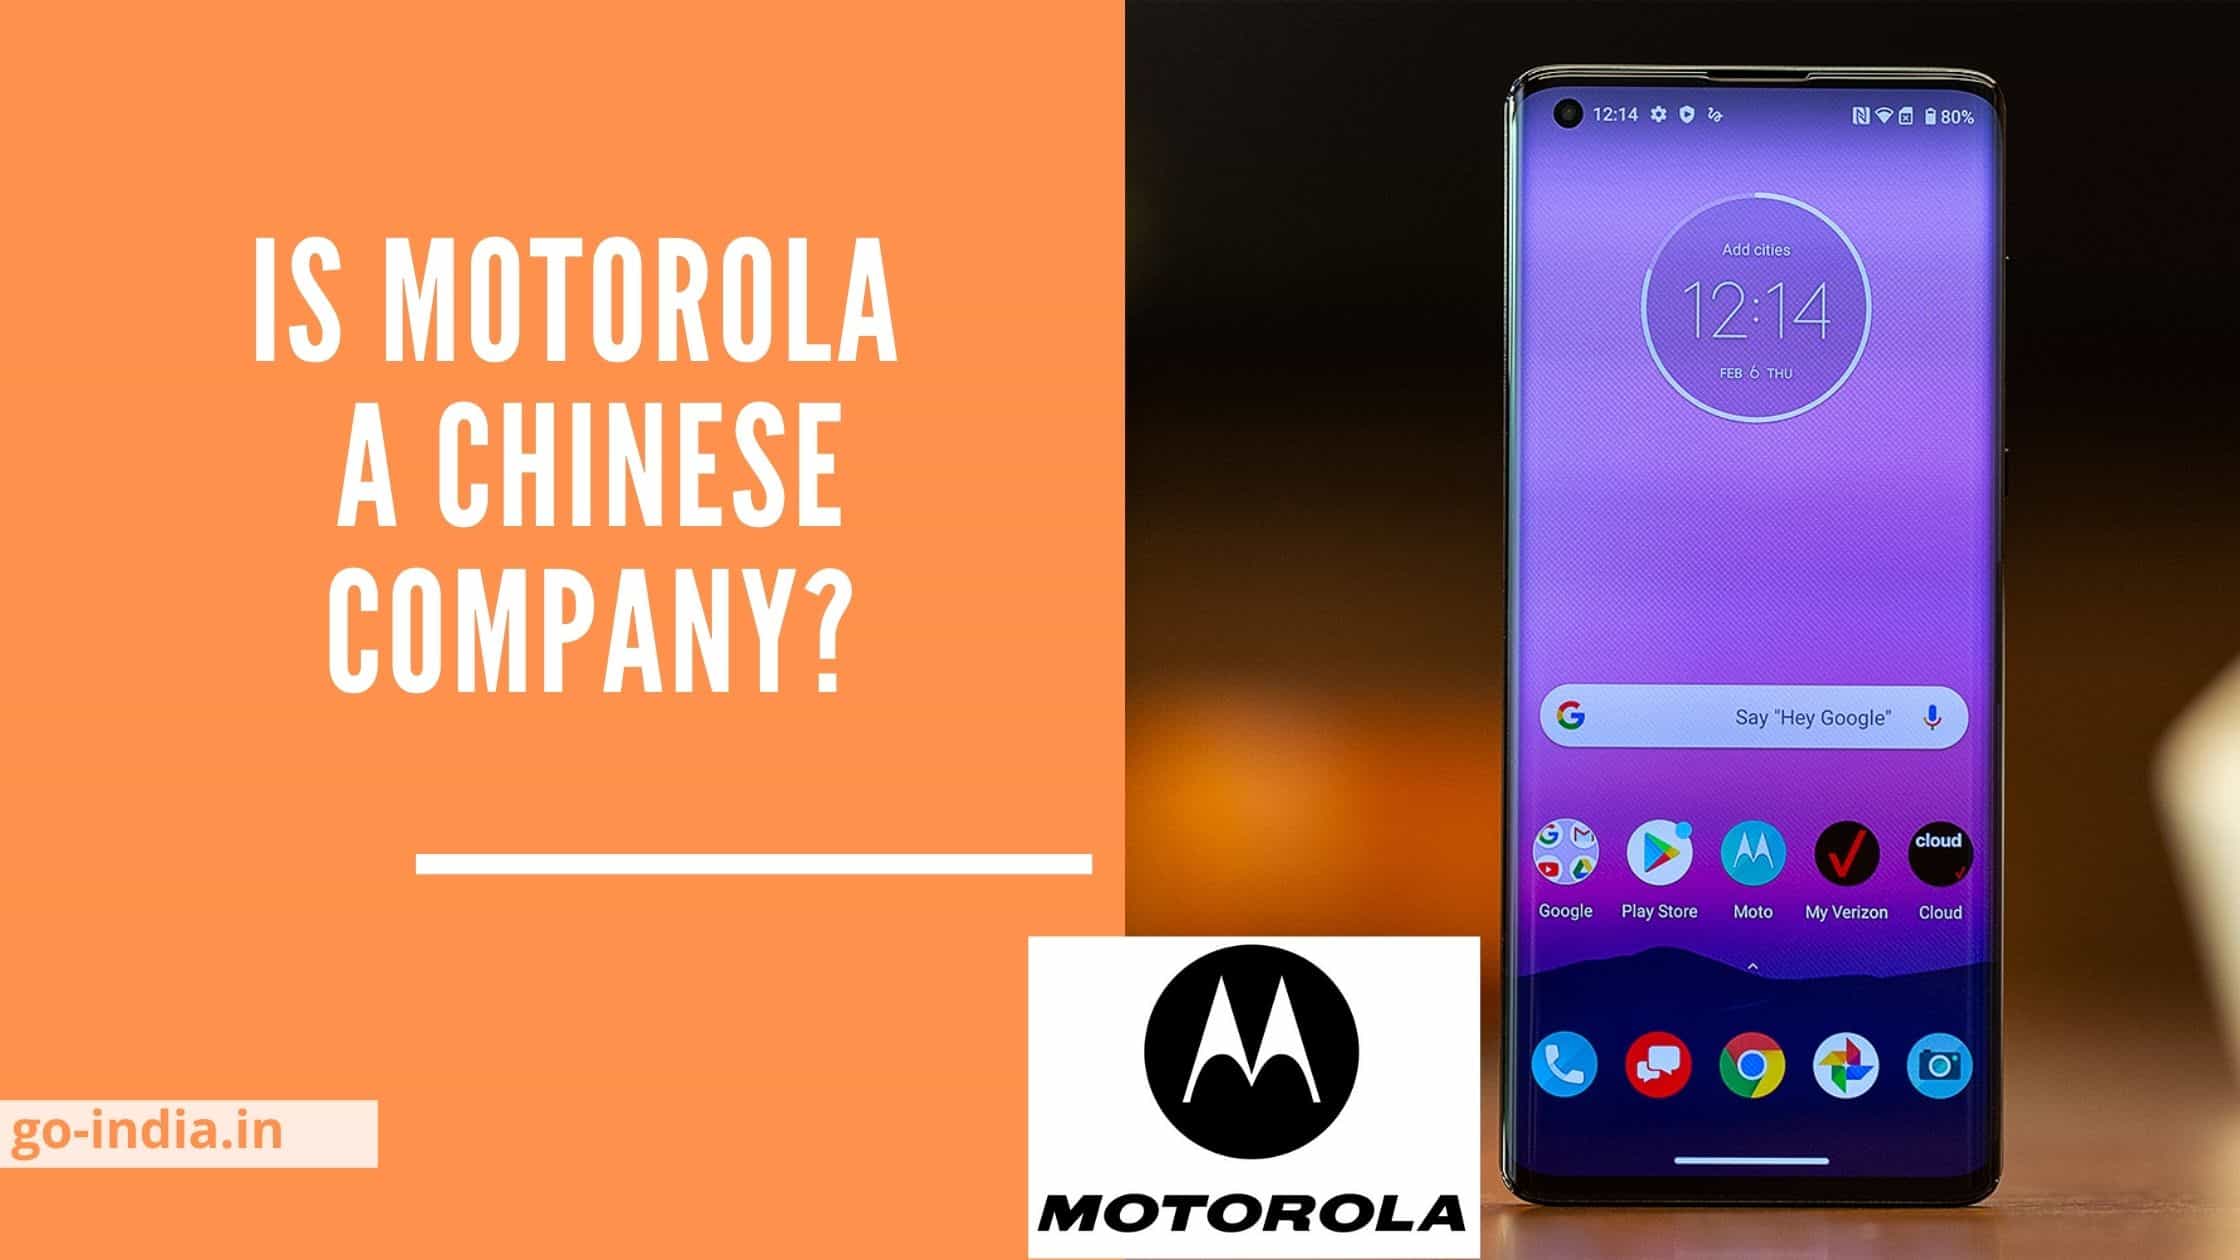 Is Motorola a Chinese Company? Is Motorola Mobility is a Chinese Company?